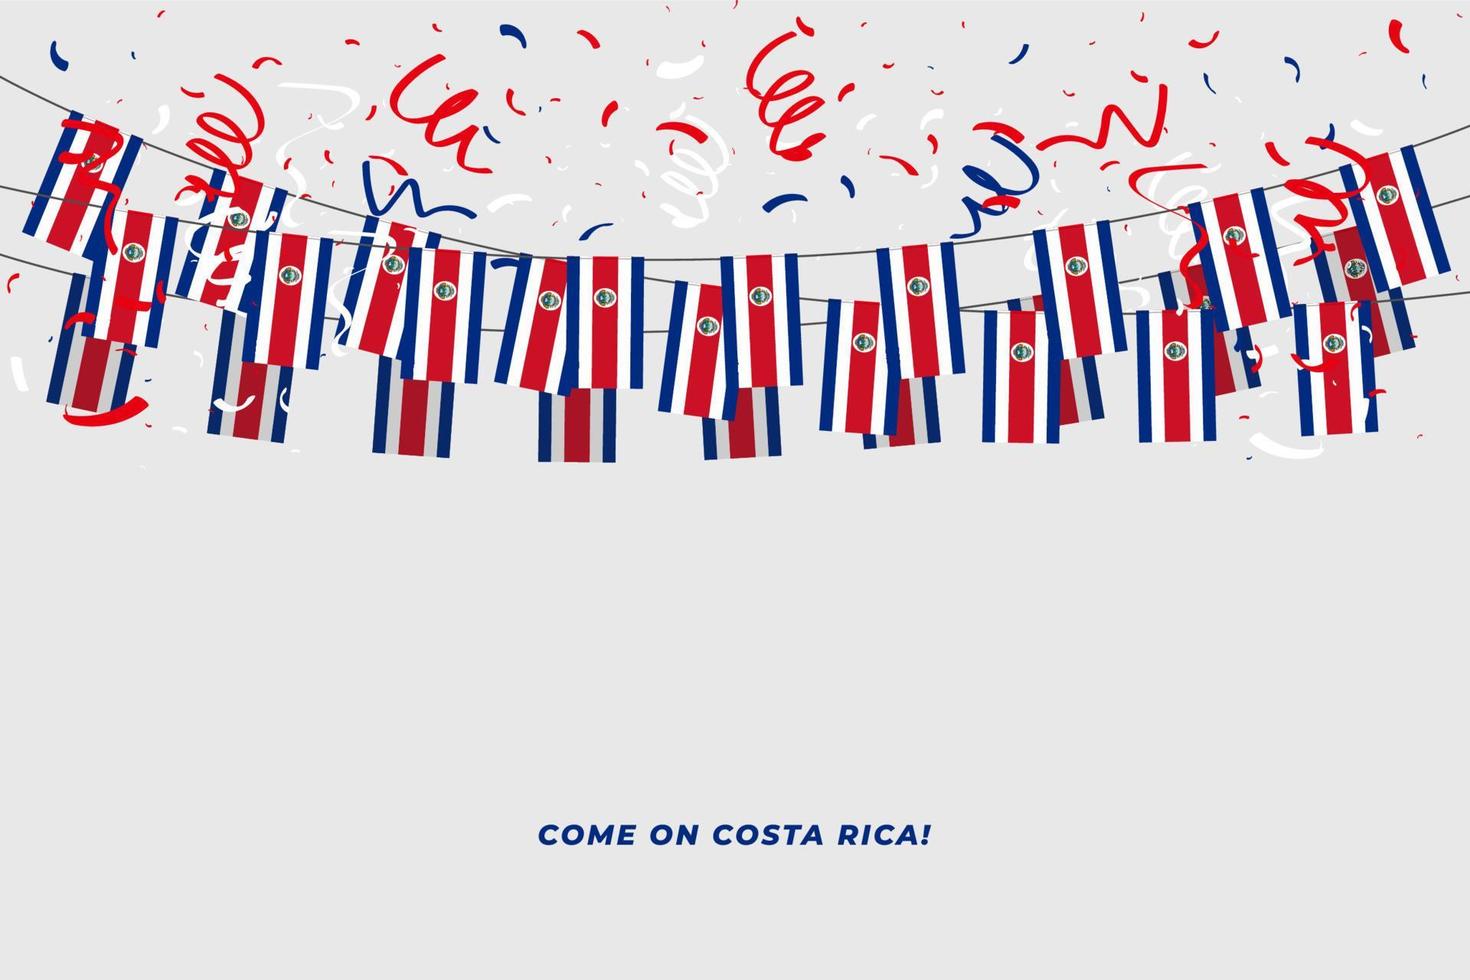 Costa Rica garland flag with confetti on white background, Hang bunting for Costa Rica celebration template banner. vector